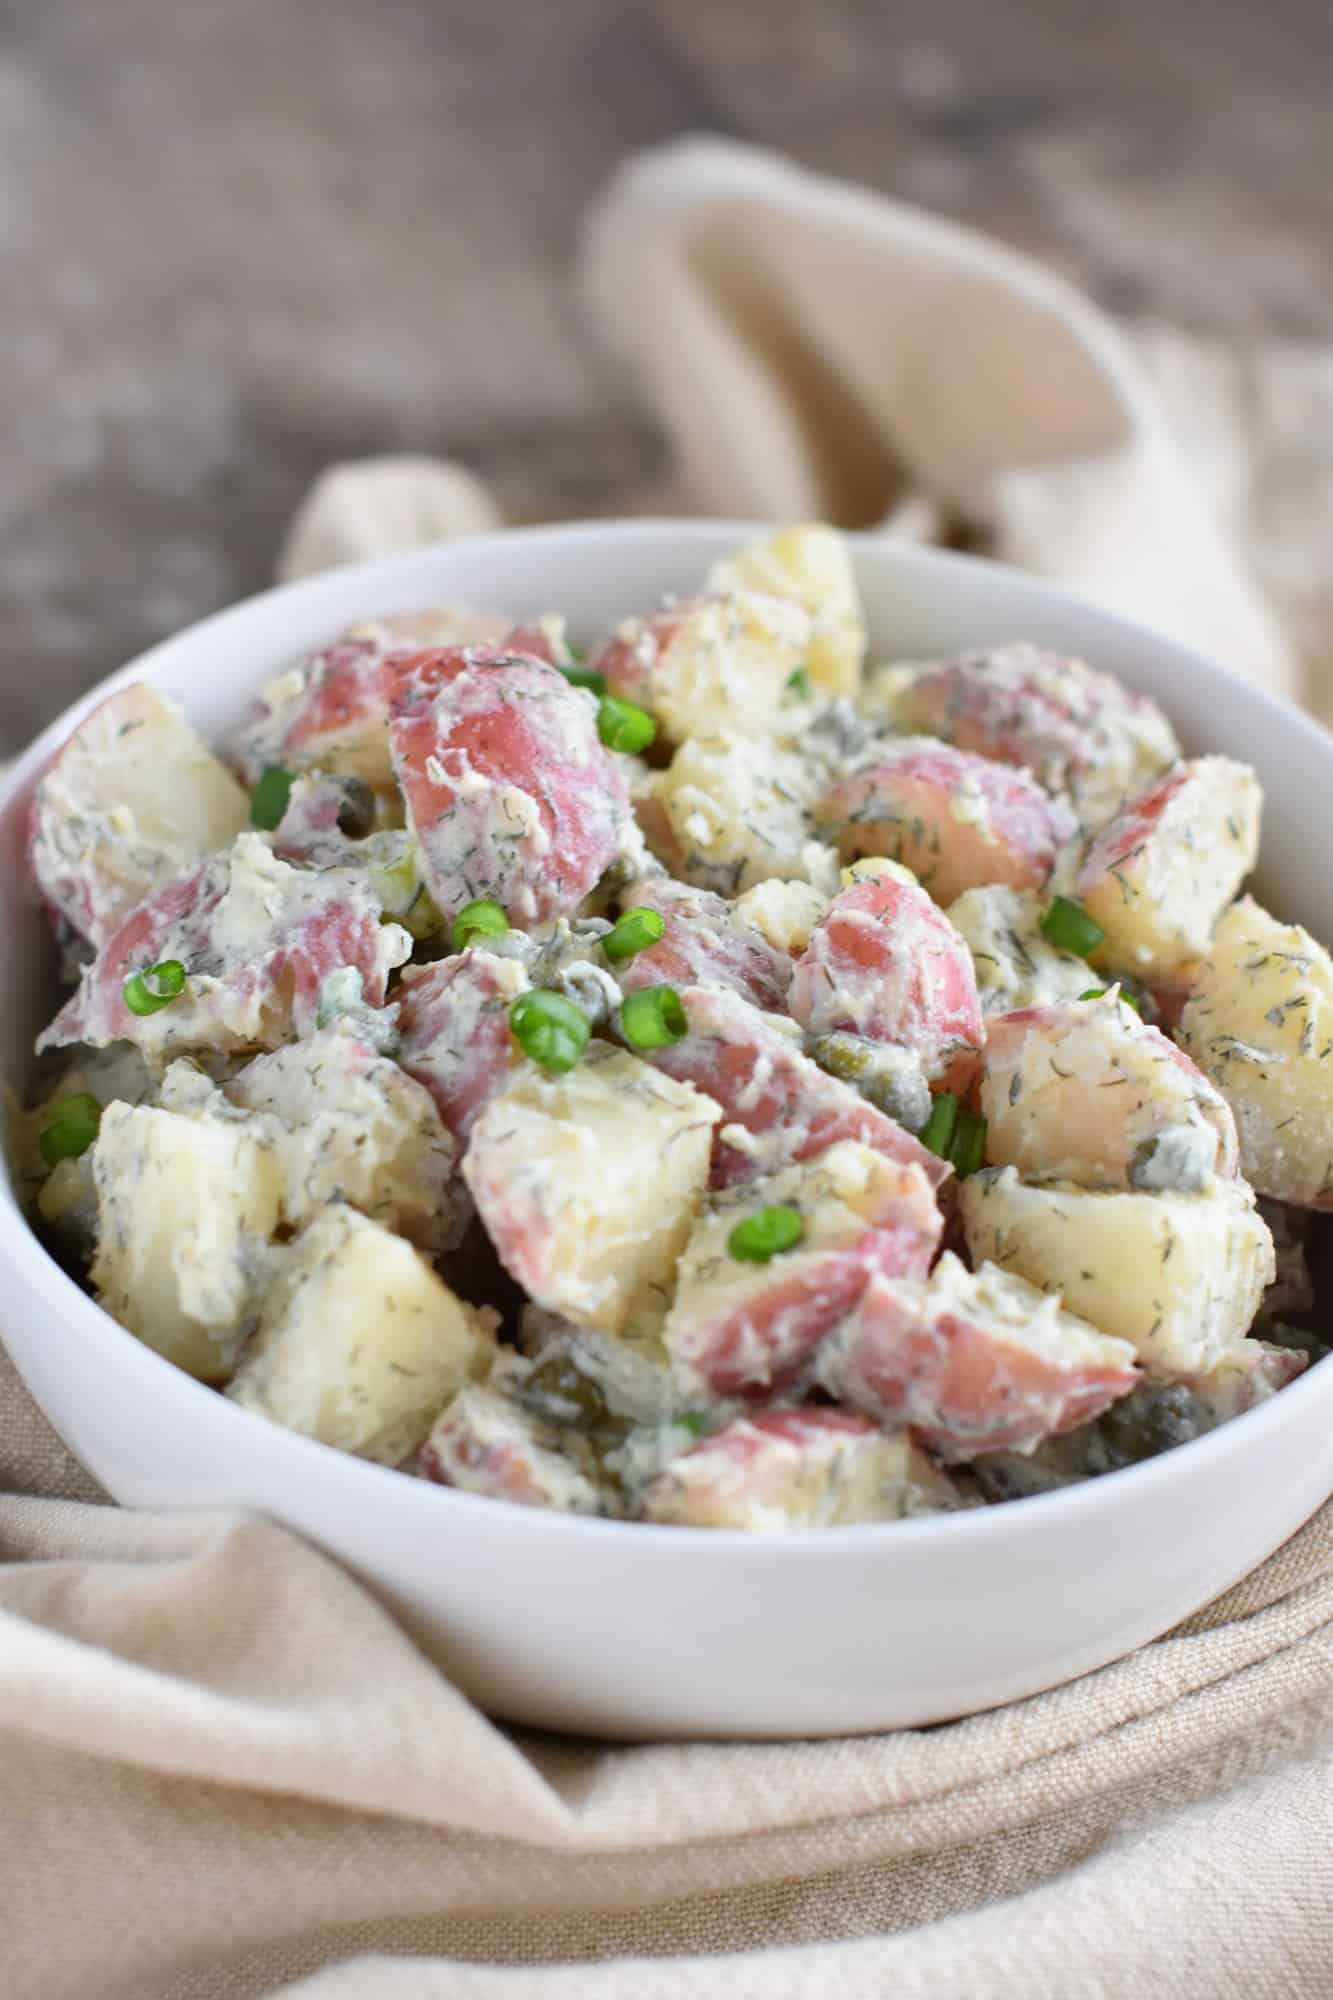 side view of potato salad in white serving bowl on a tan napkin